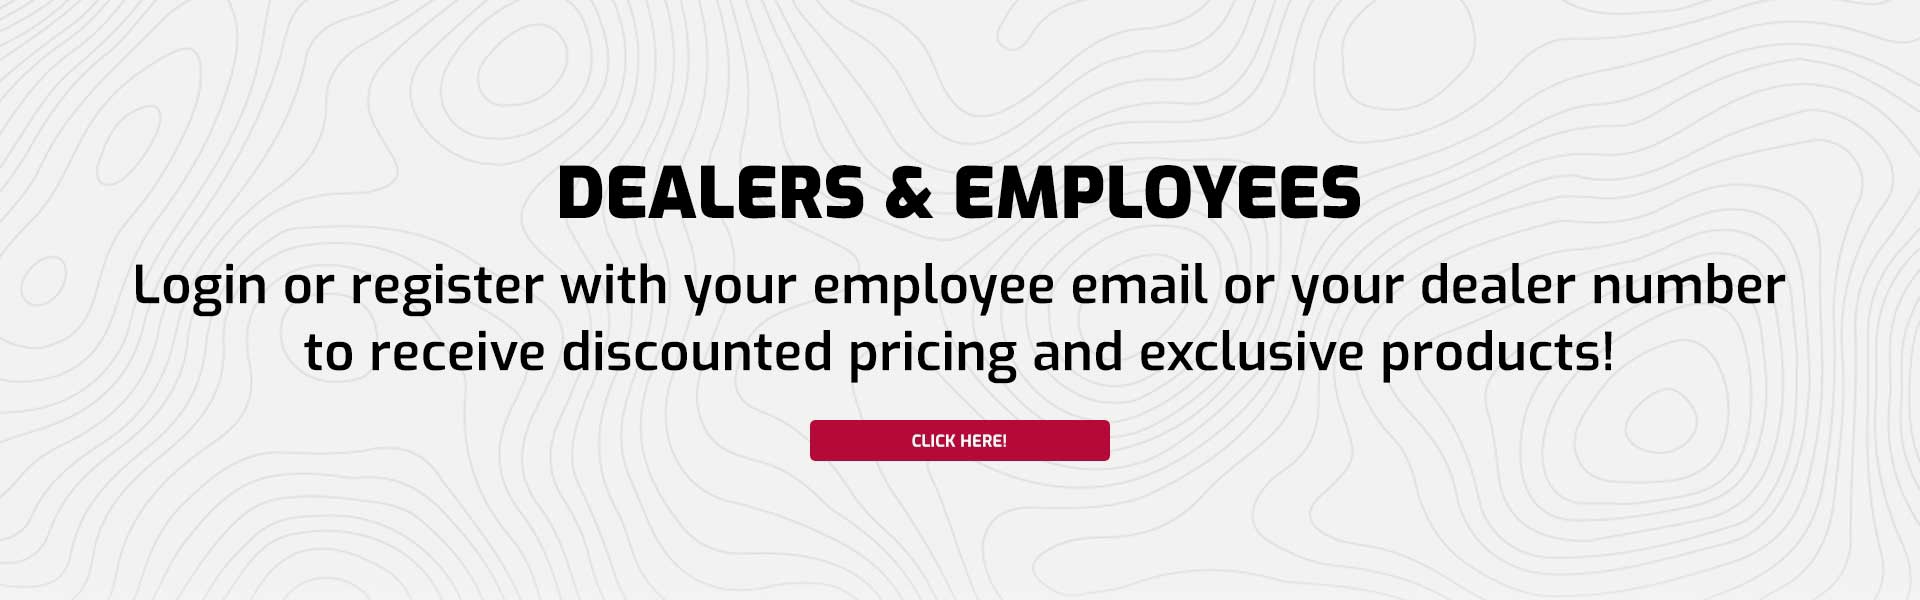 Dealers & Employees - Login or register with your employee email or your dealer number to receive discounted pricing and exclusive products!